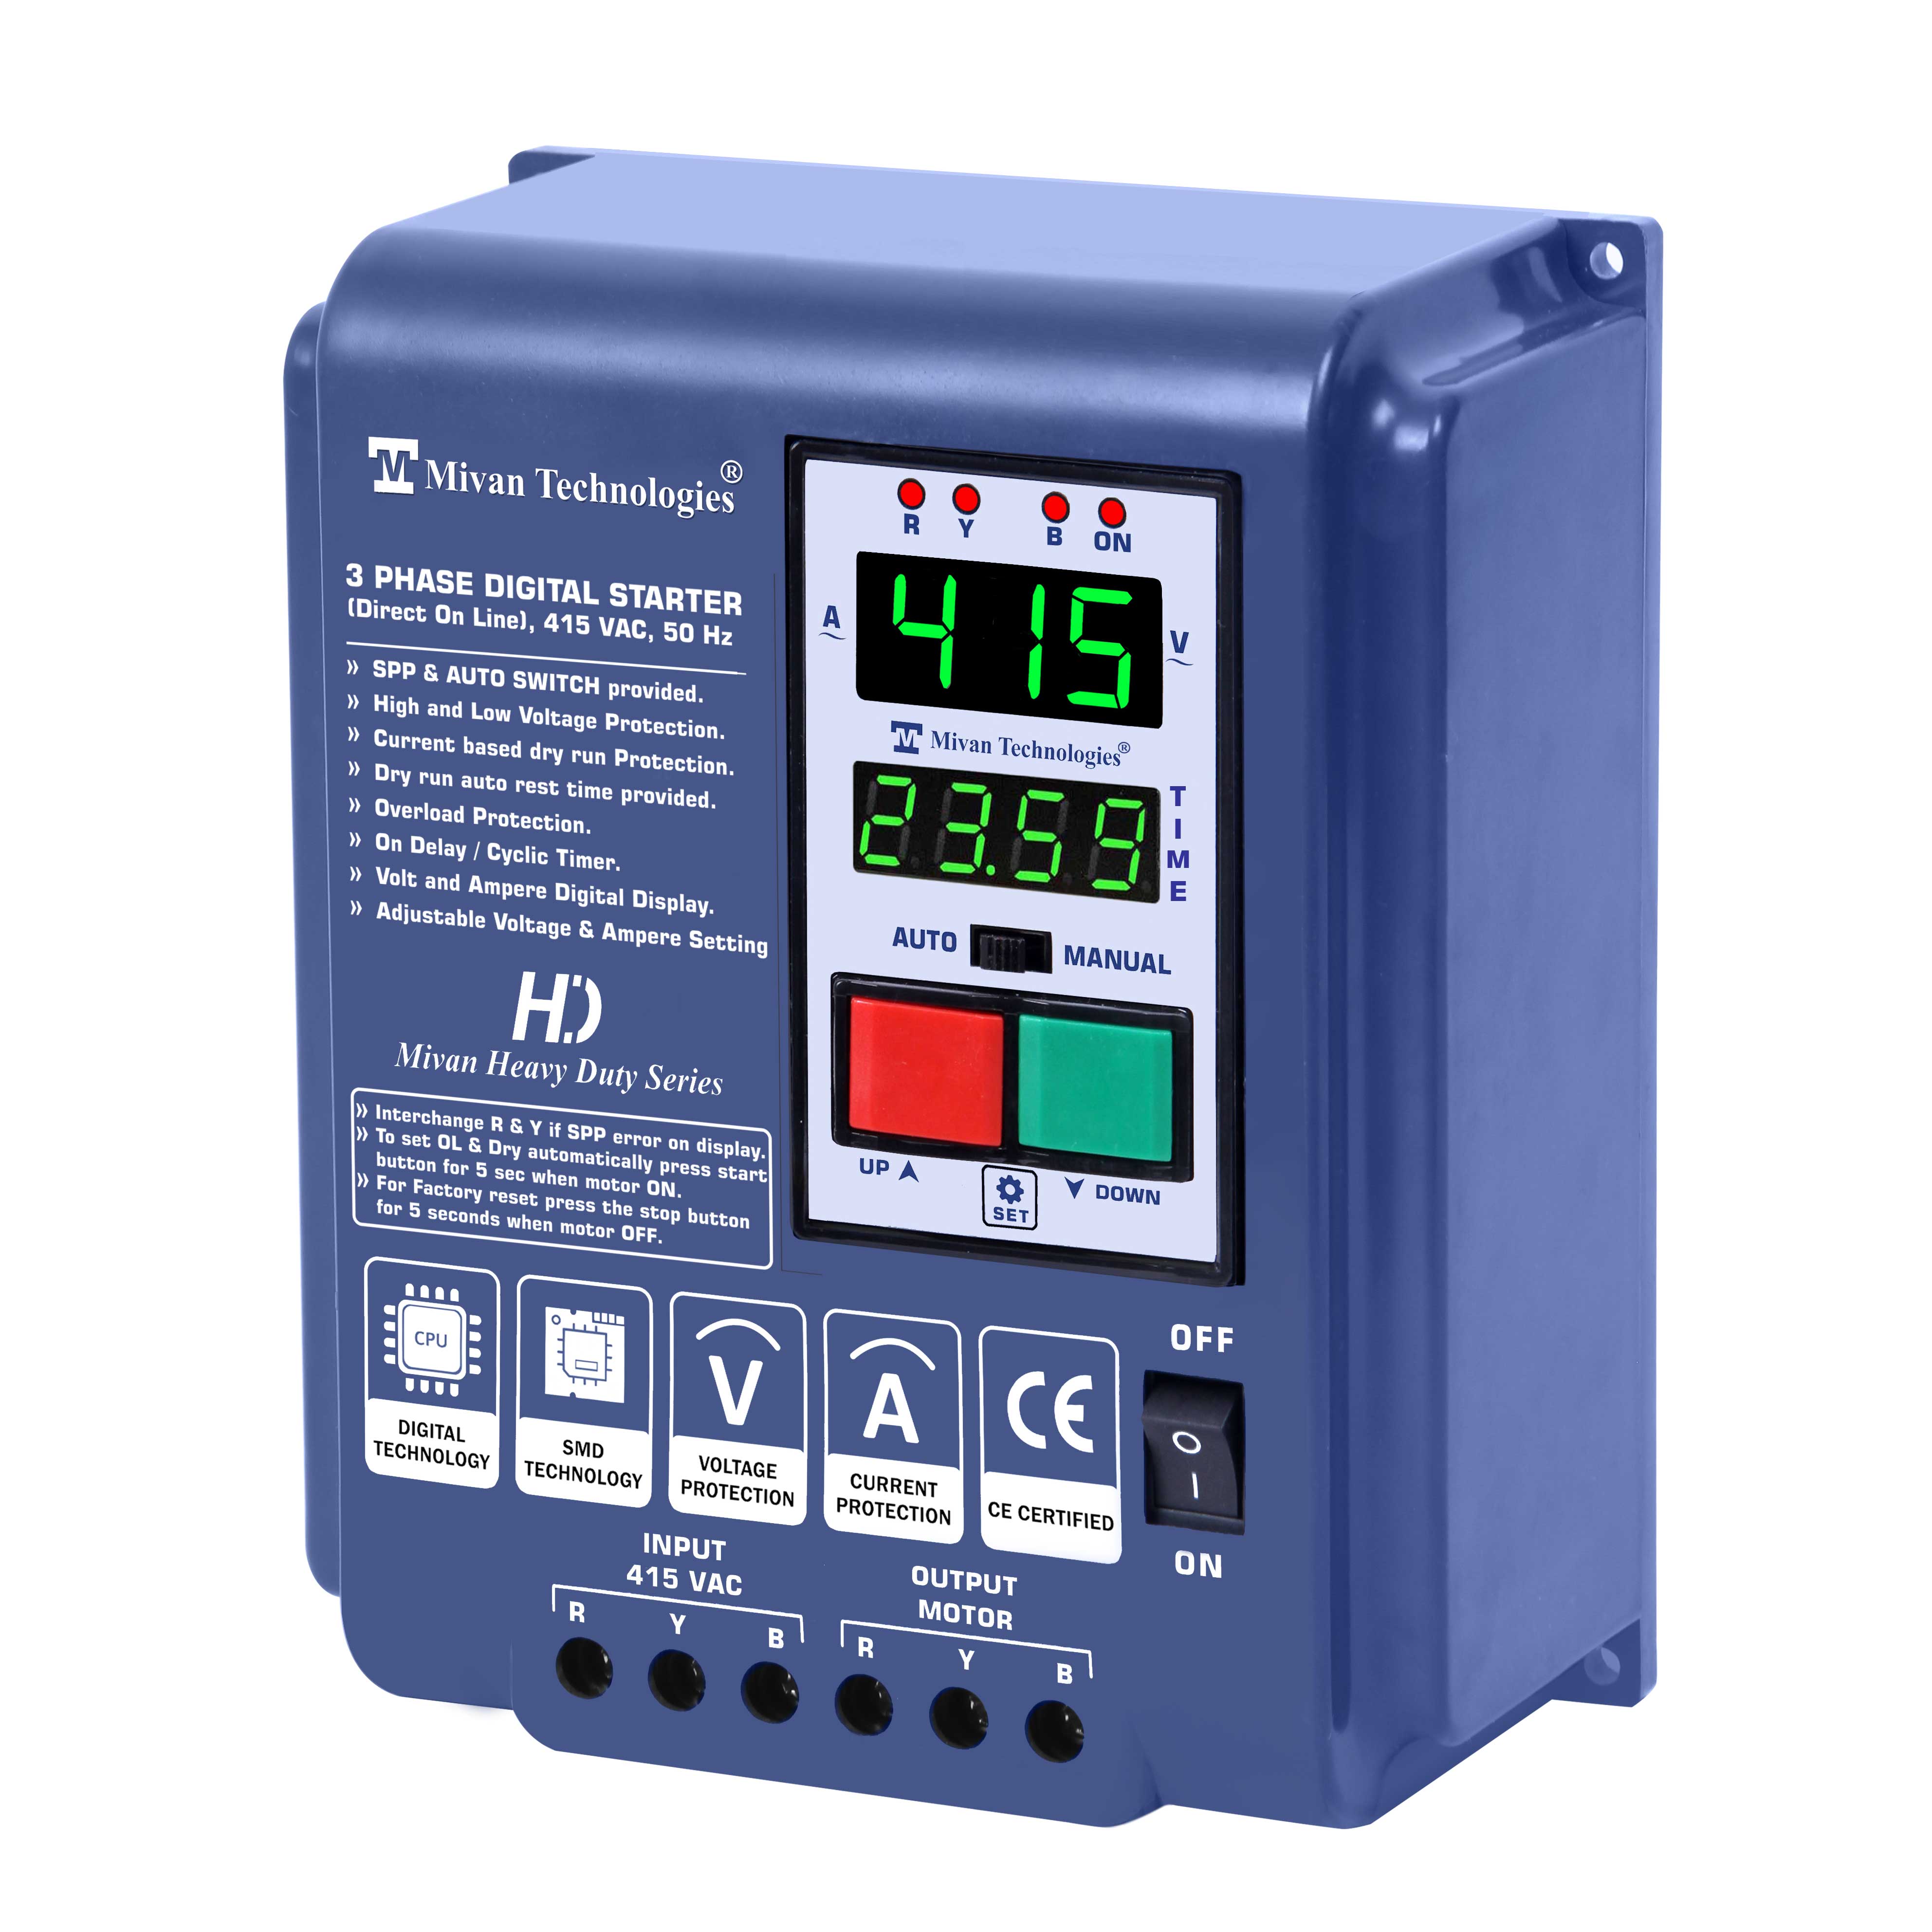 DP301S  RTC 3 PHASE Digital DOL starter with REAL TIME TIMER with V A meter with HV LV OL DRY PROTECTION with cyclic TIMER with SPP and Auto switch